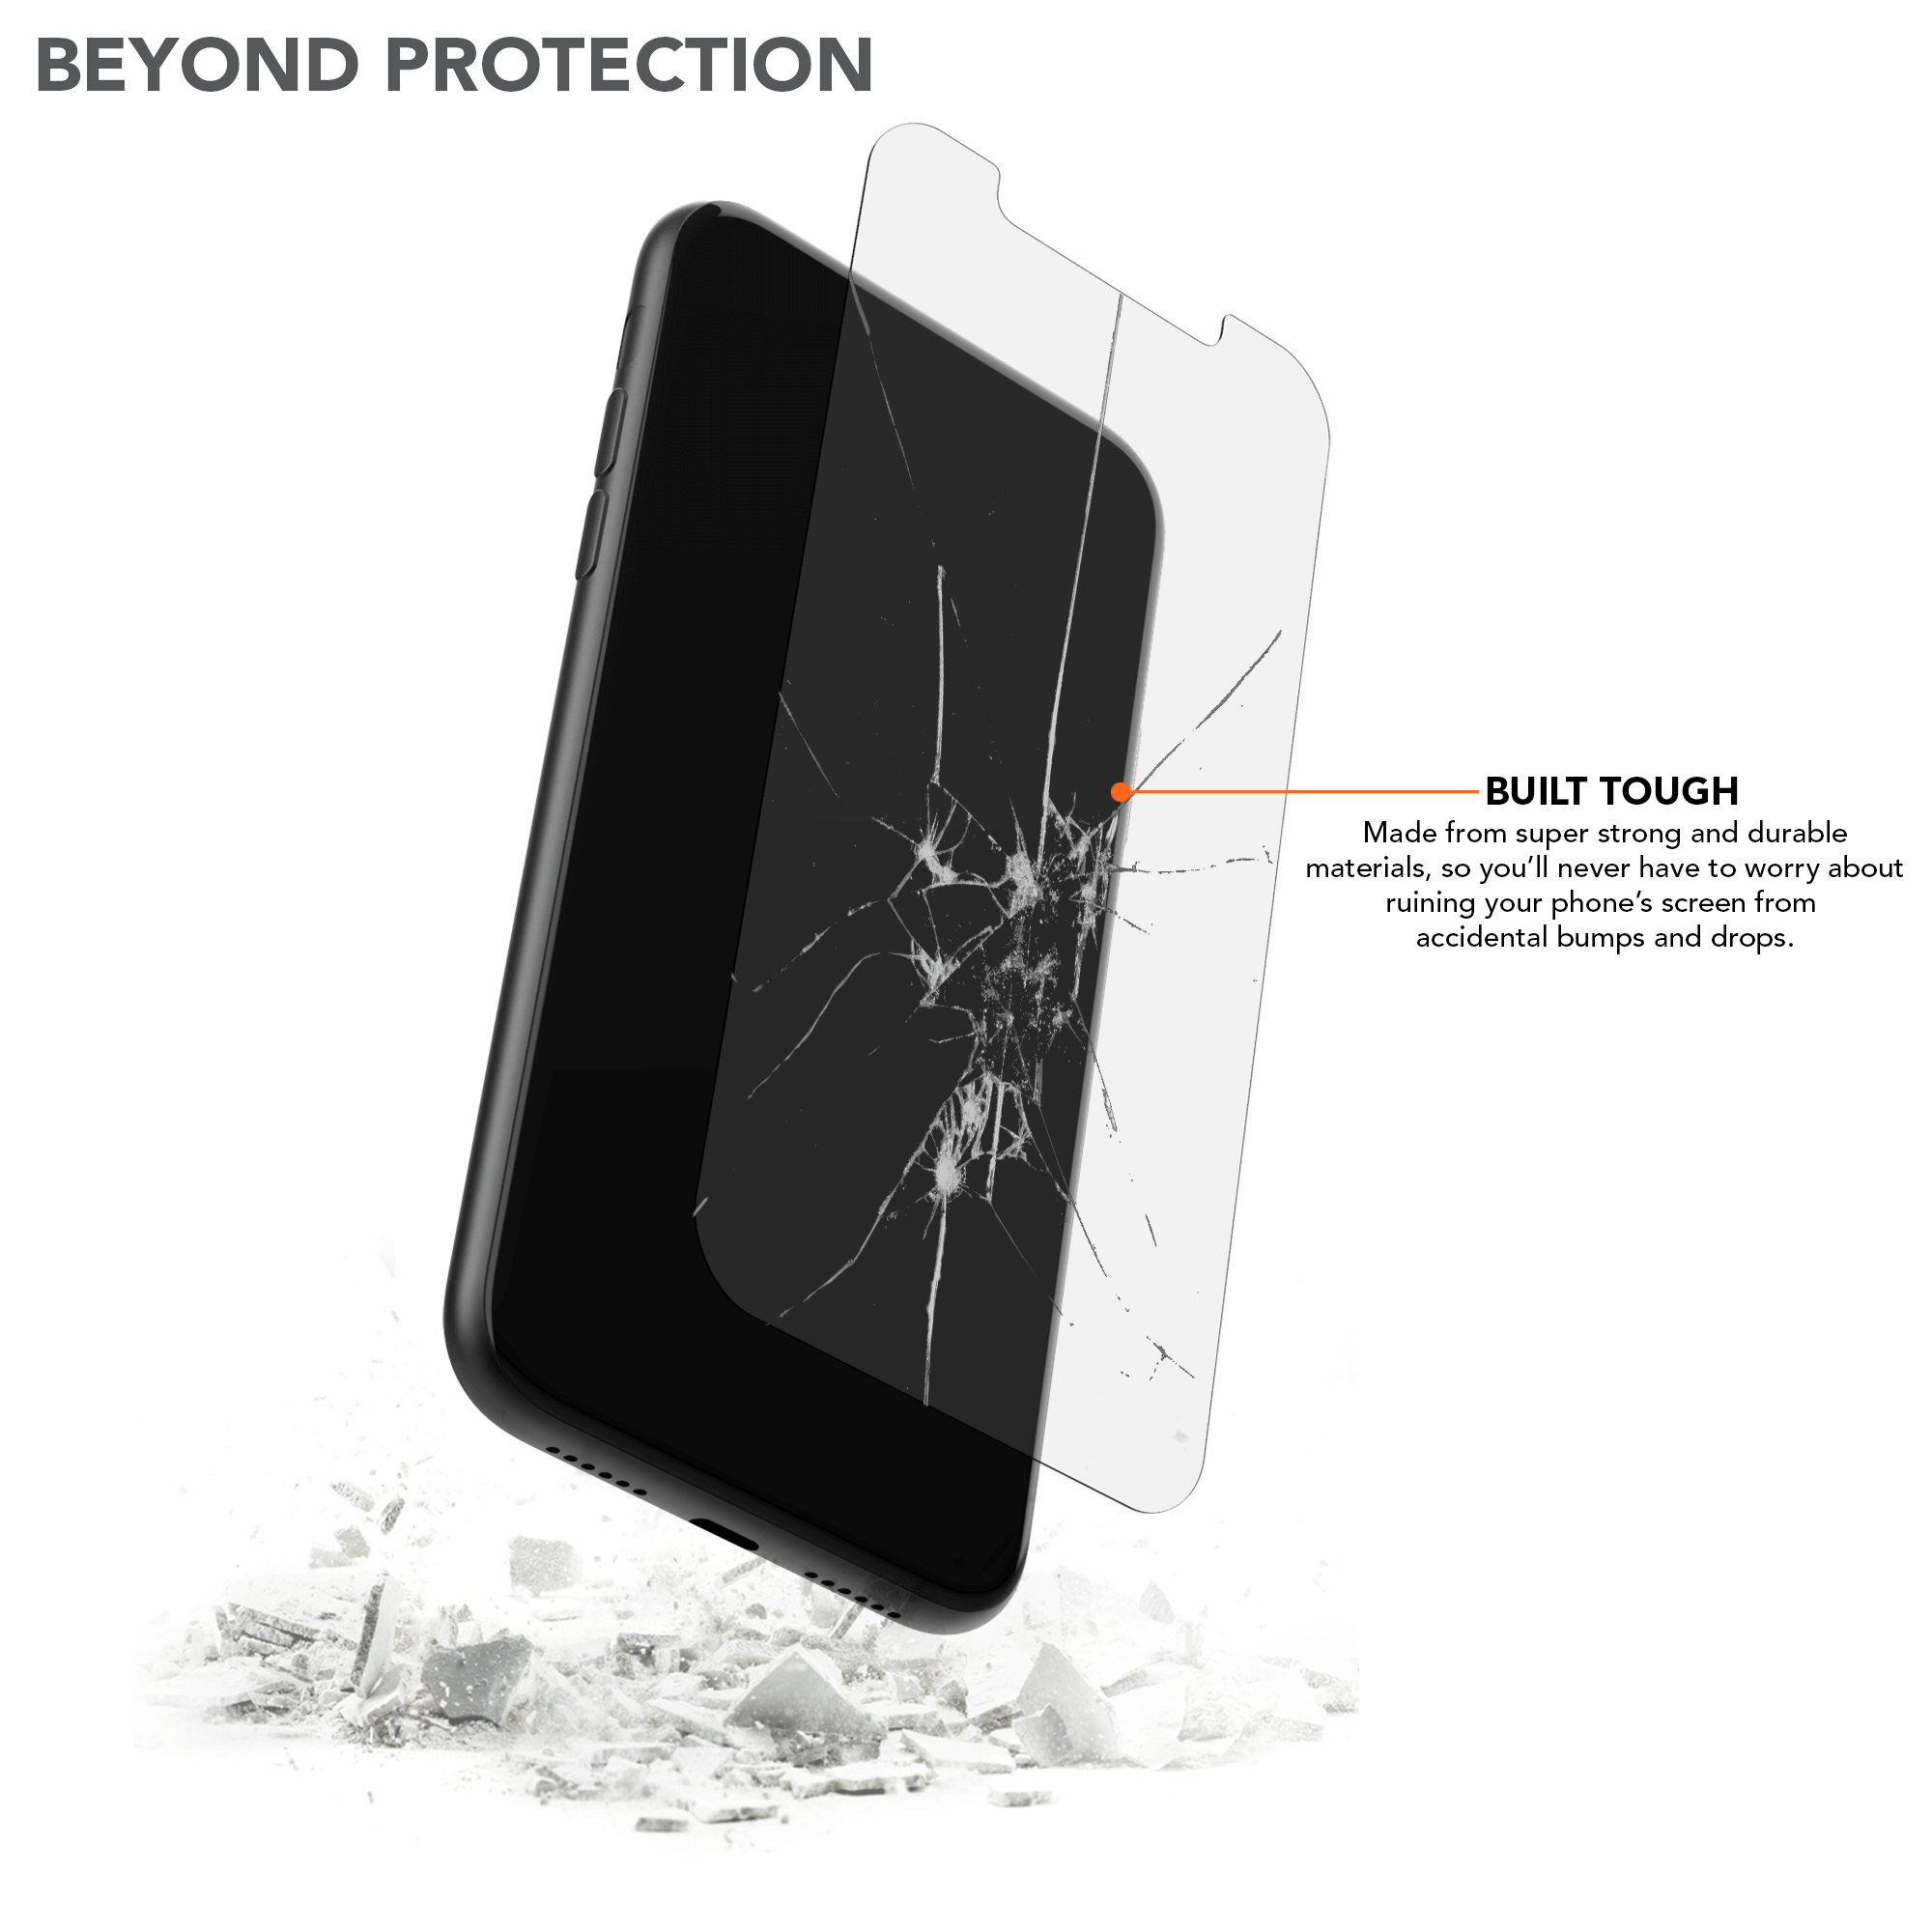 Tempered Glass Screen Protector COOL for iPhone X / iPhone XS / iPhone 11  Pro (FULL 3D Black) - Cool Accesorios